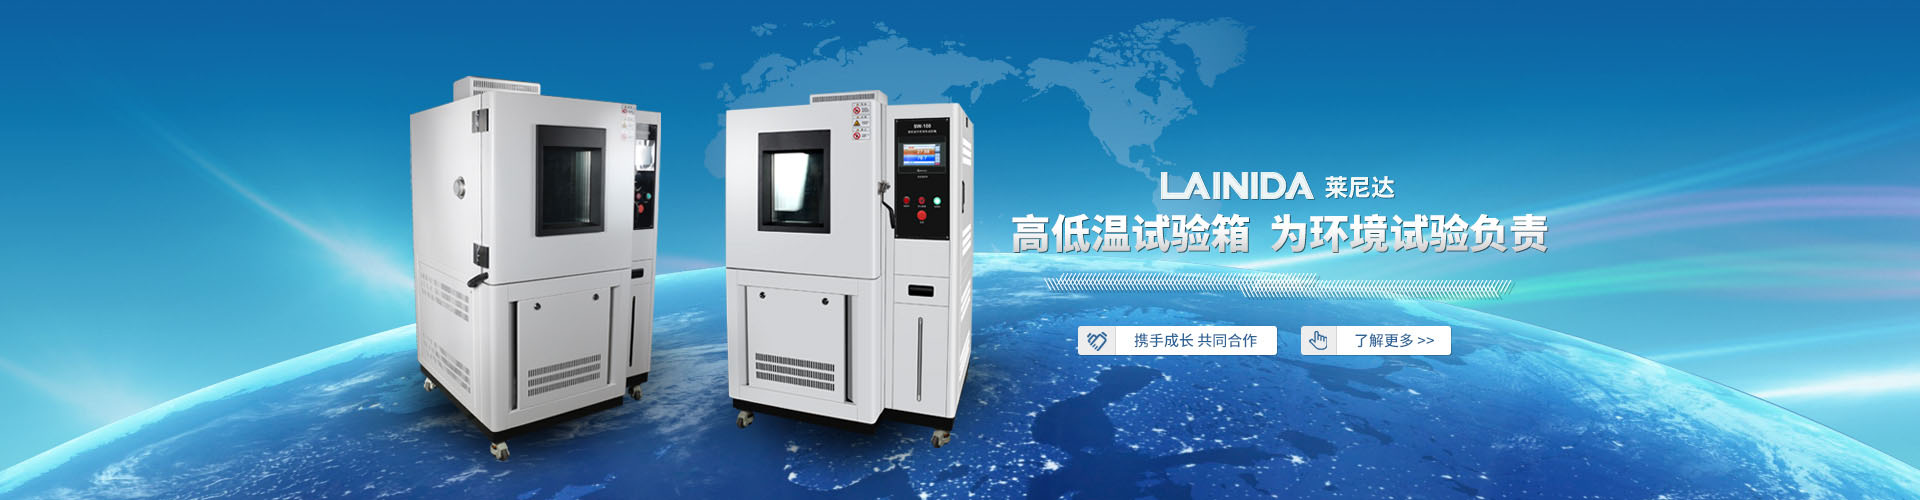 Non-standard custom-made high and low temperature test chamber，Non-standard custom universal testing